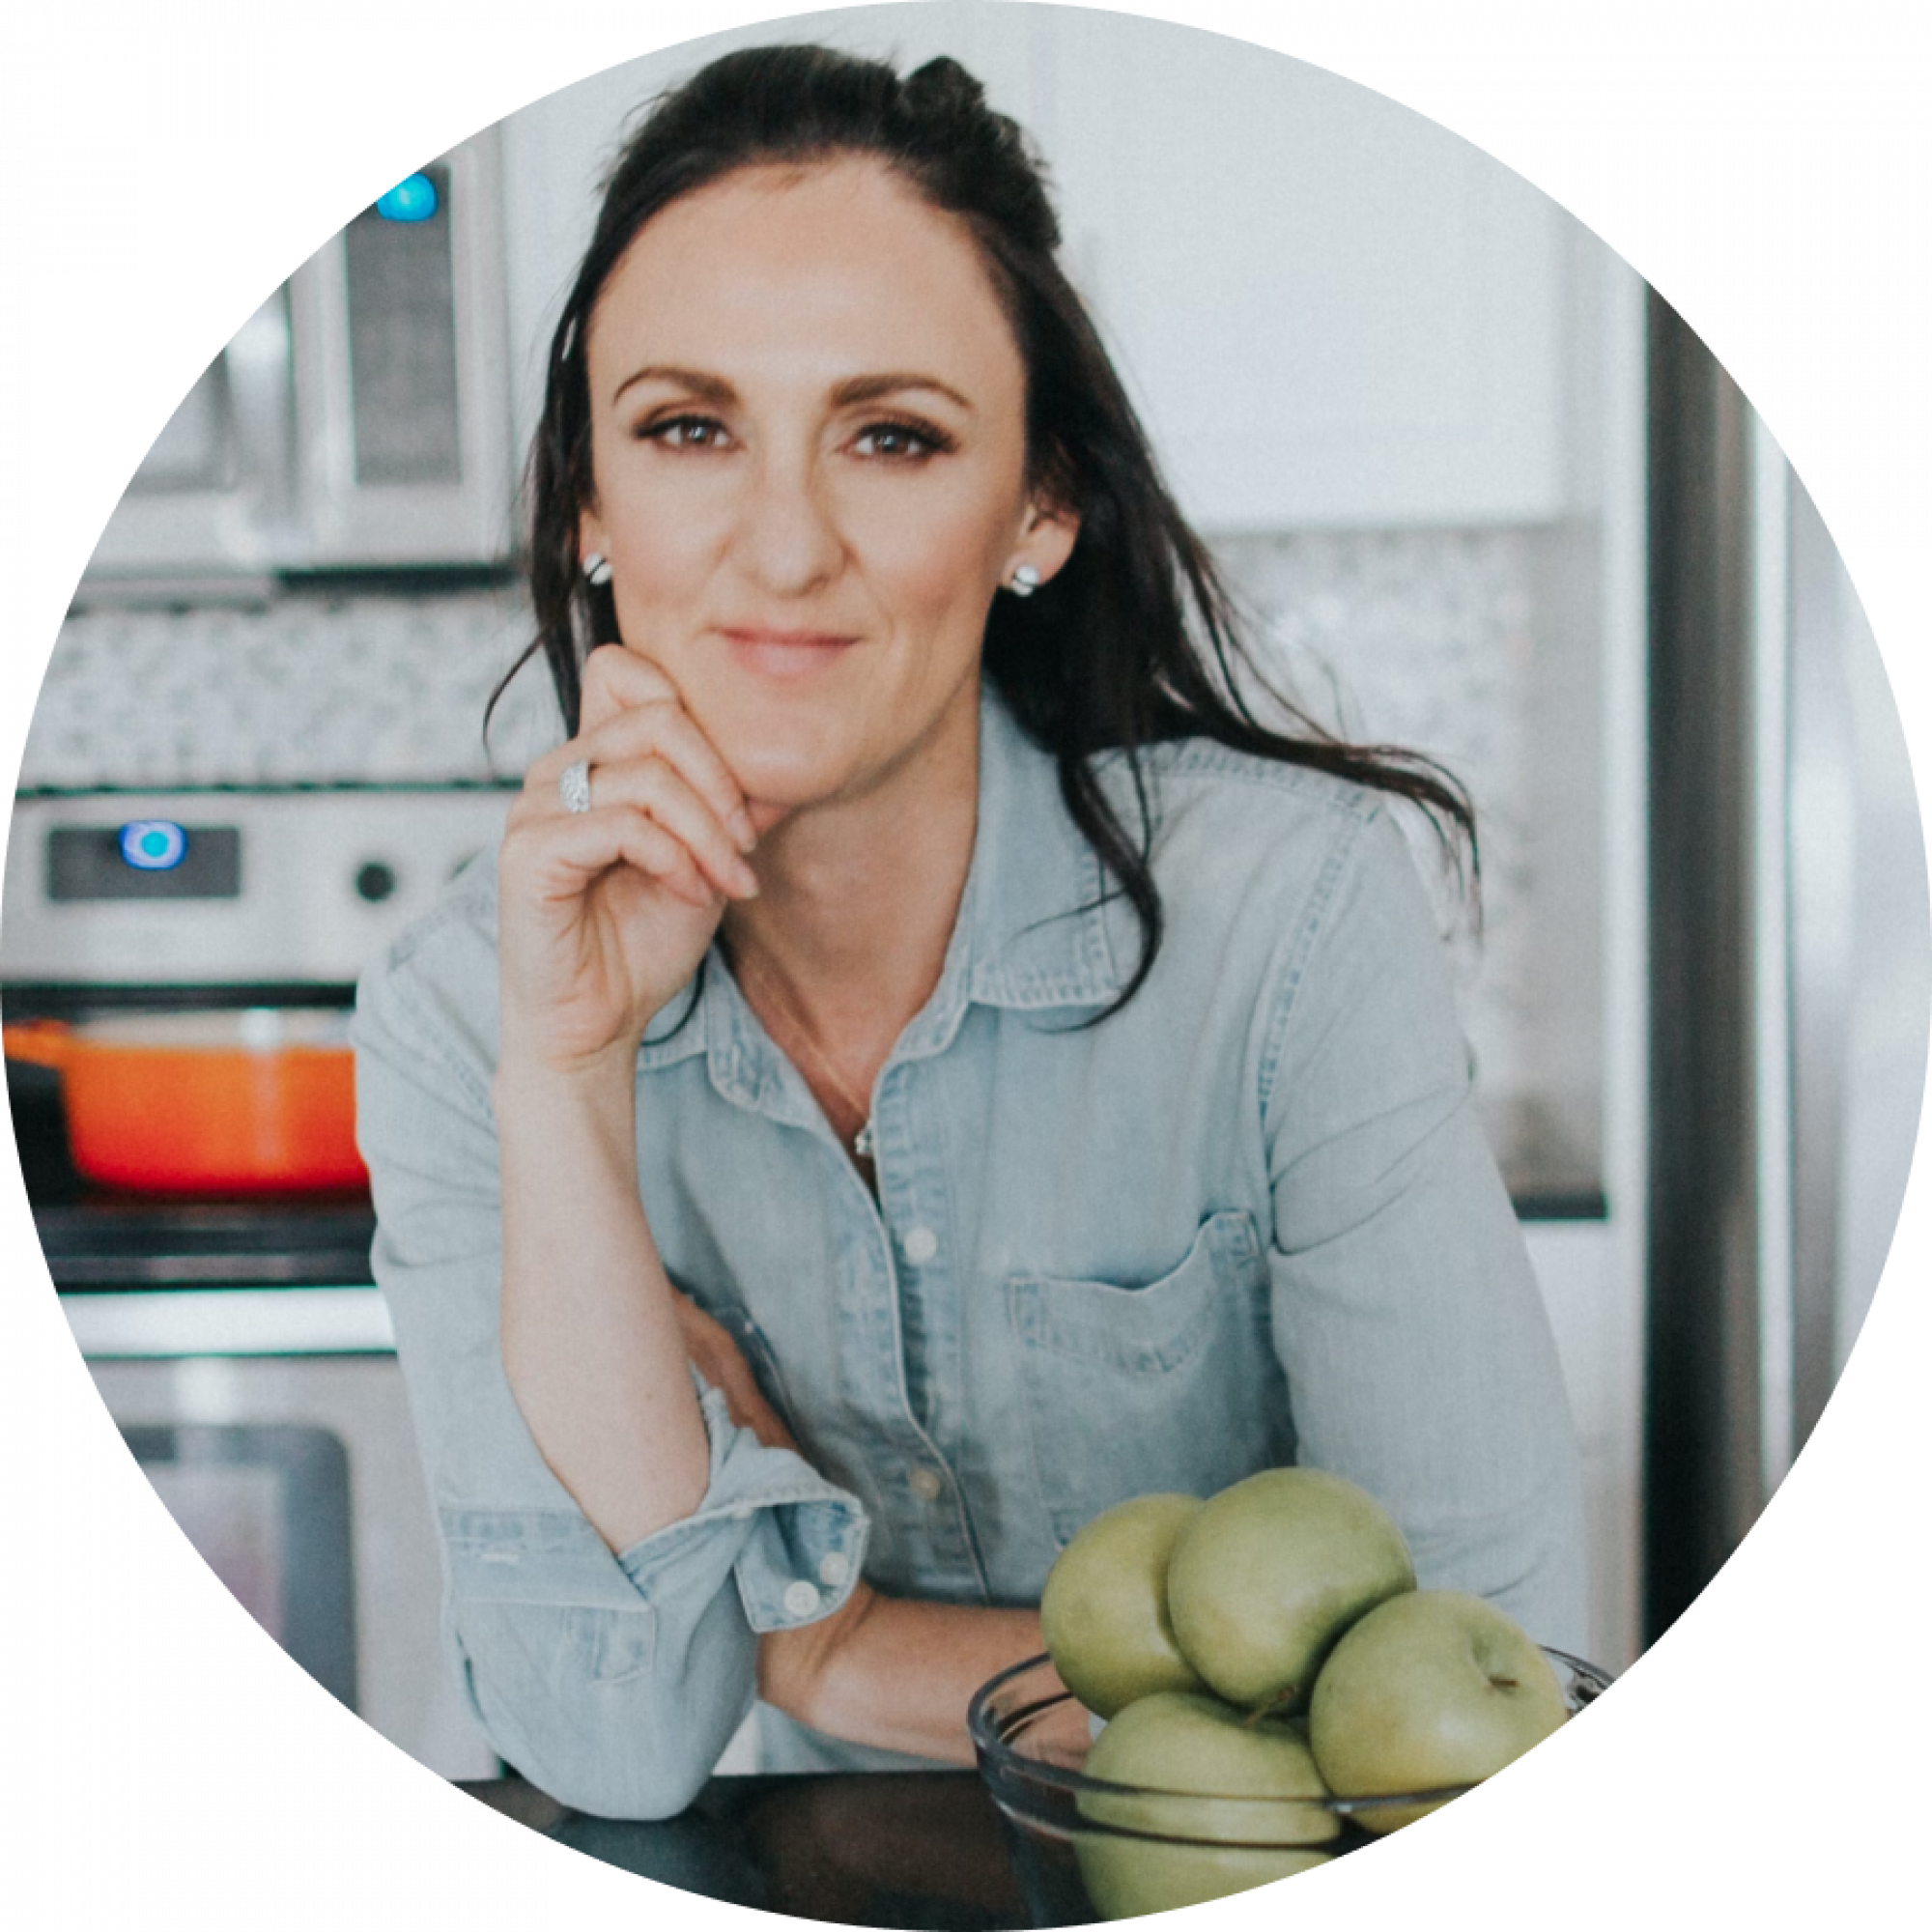 A woman in a denim shirt smiles at the camera, resting her chin on her hand, with a bowl of green apples in front of her in a kitchen.